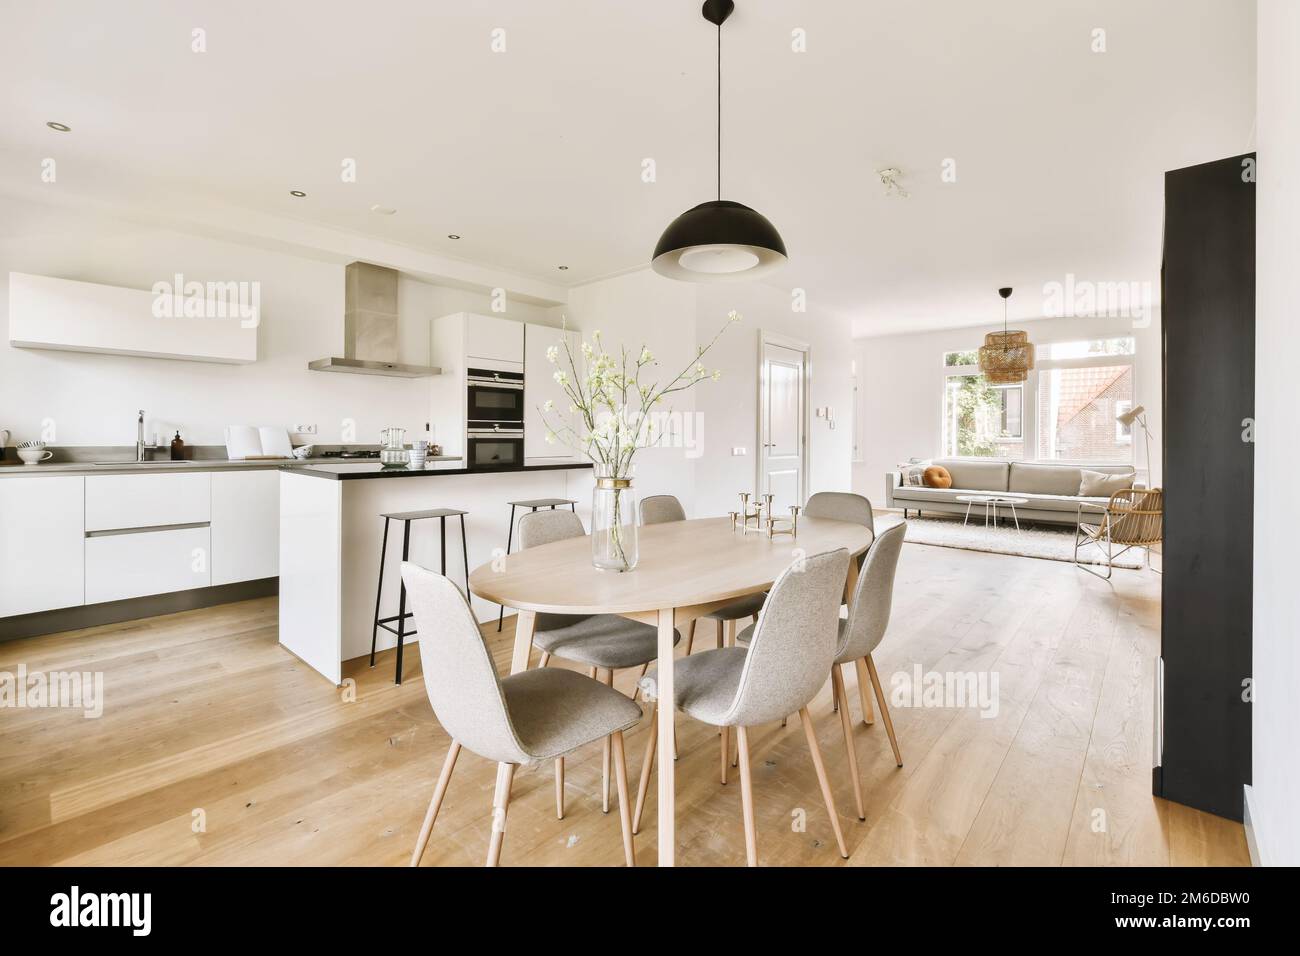 a kitchen, dining room and living area in an apartment with white walls and wood flooring the table is surrounded by grey chairs Stock Photo